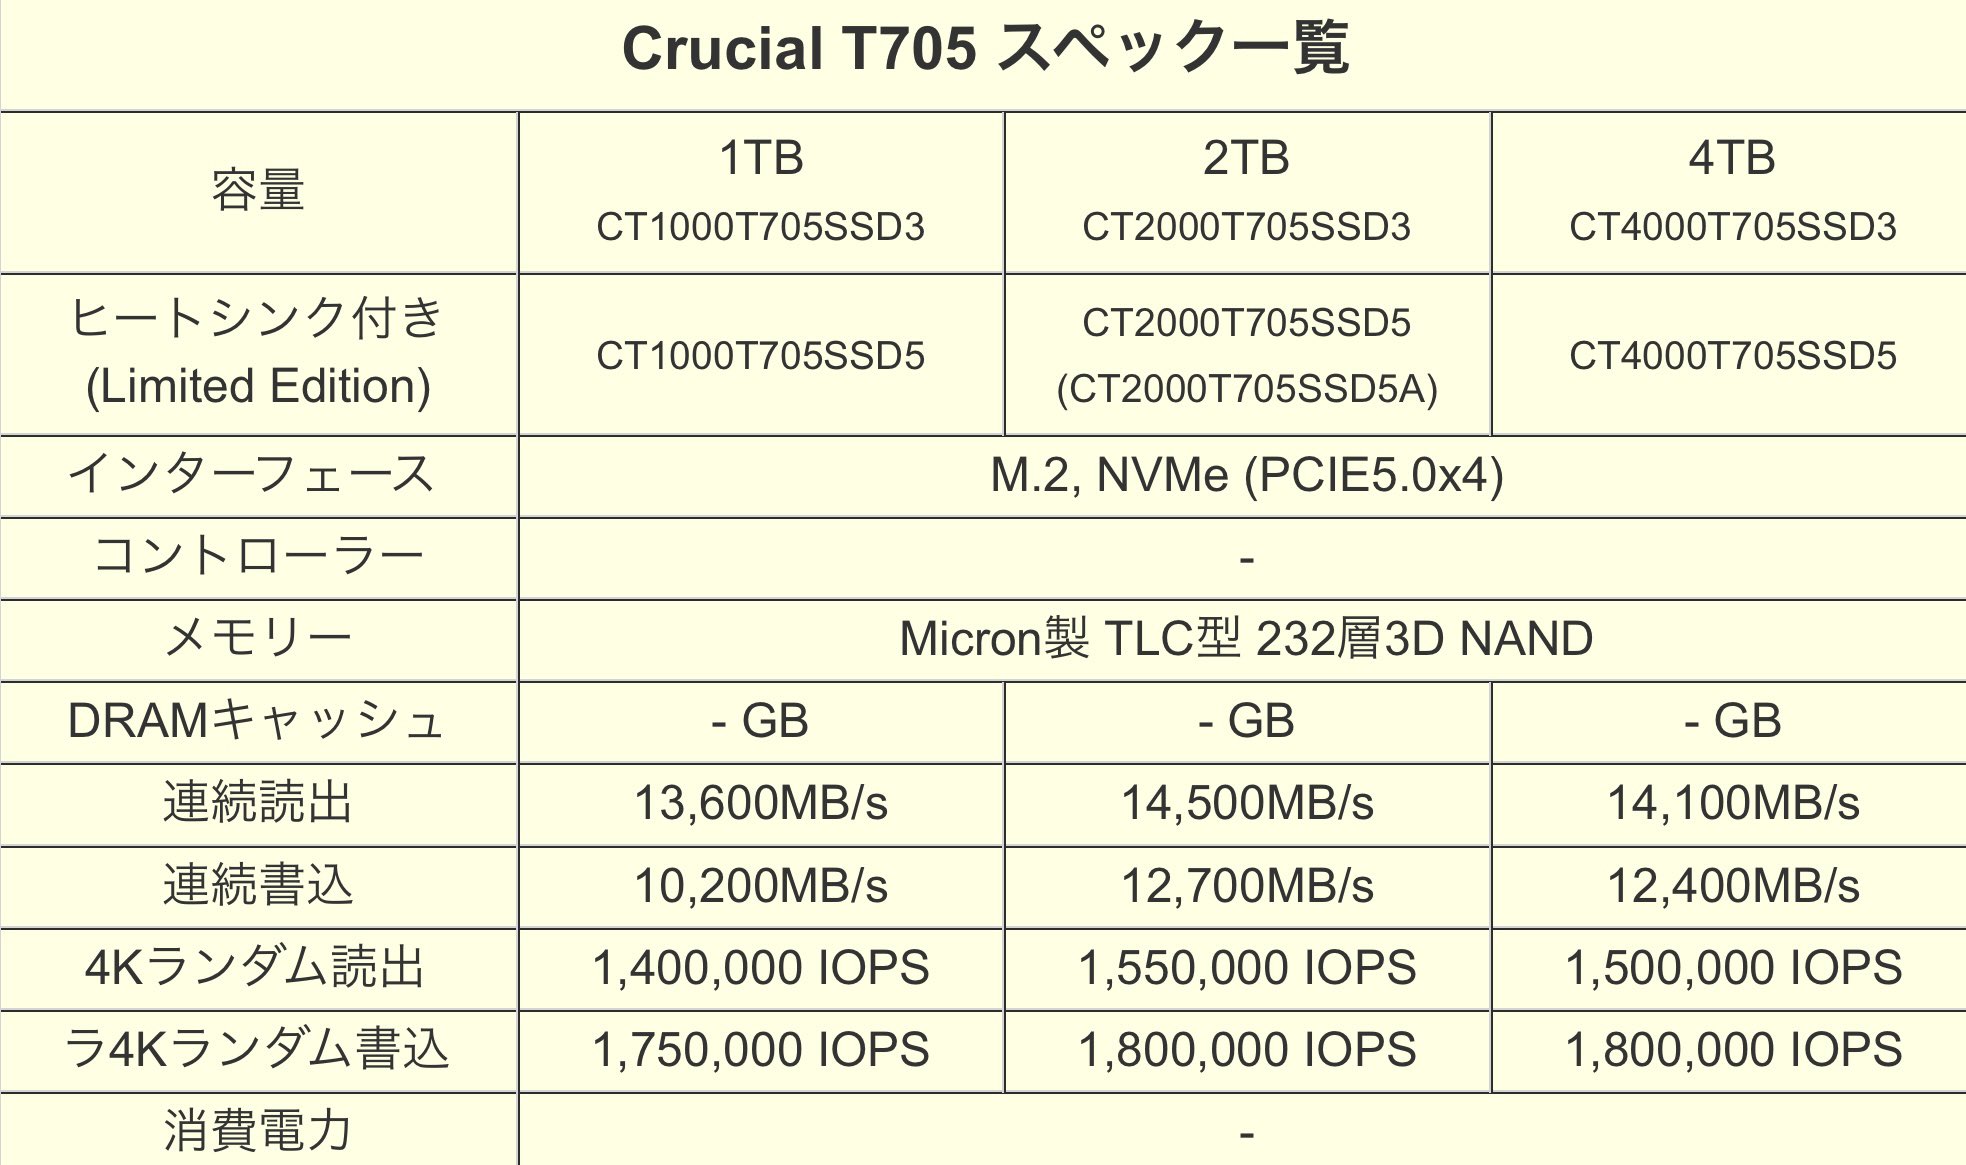 Media asset in full size related to 3dfxzone.it news item entitled as follows: On line le foto degli SSD NVMe M.2 T705 e T705 Limited Edition di Crucial | Image Name: news35293_SSD-Crucial-T705_4.jpg